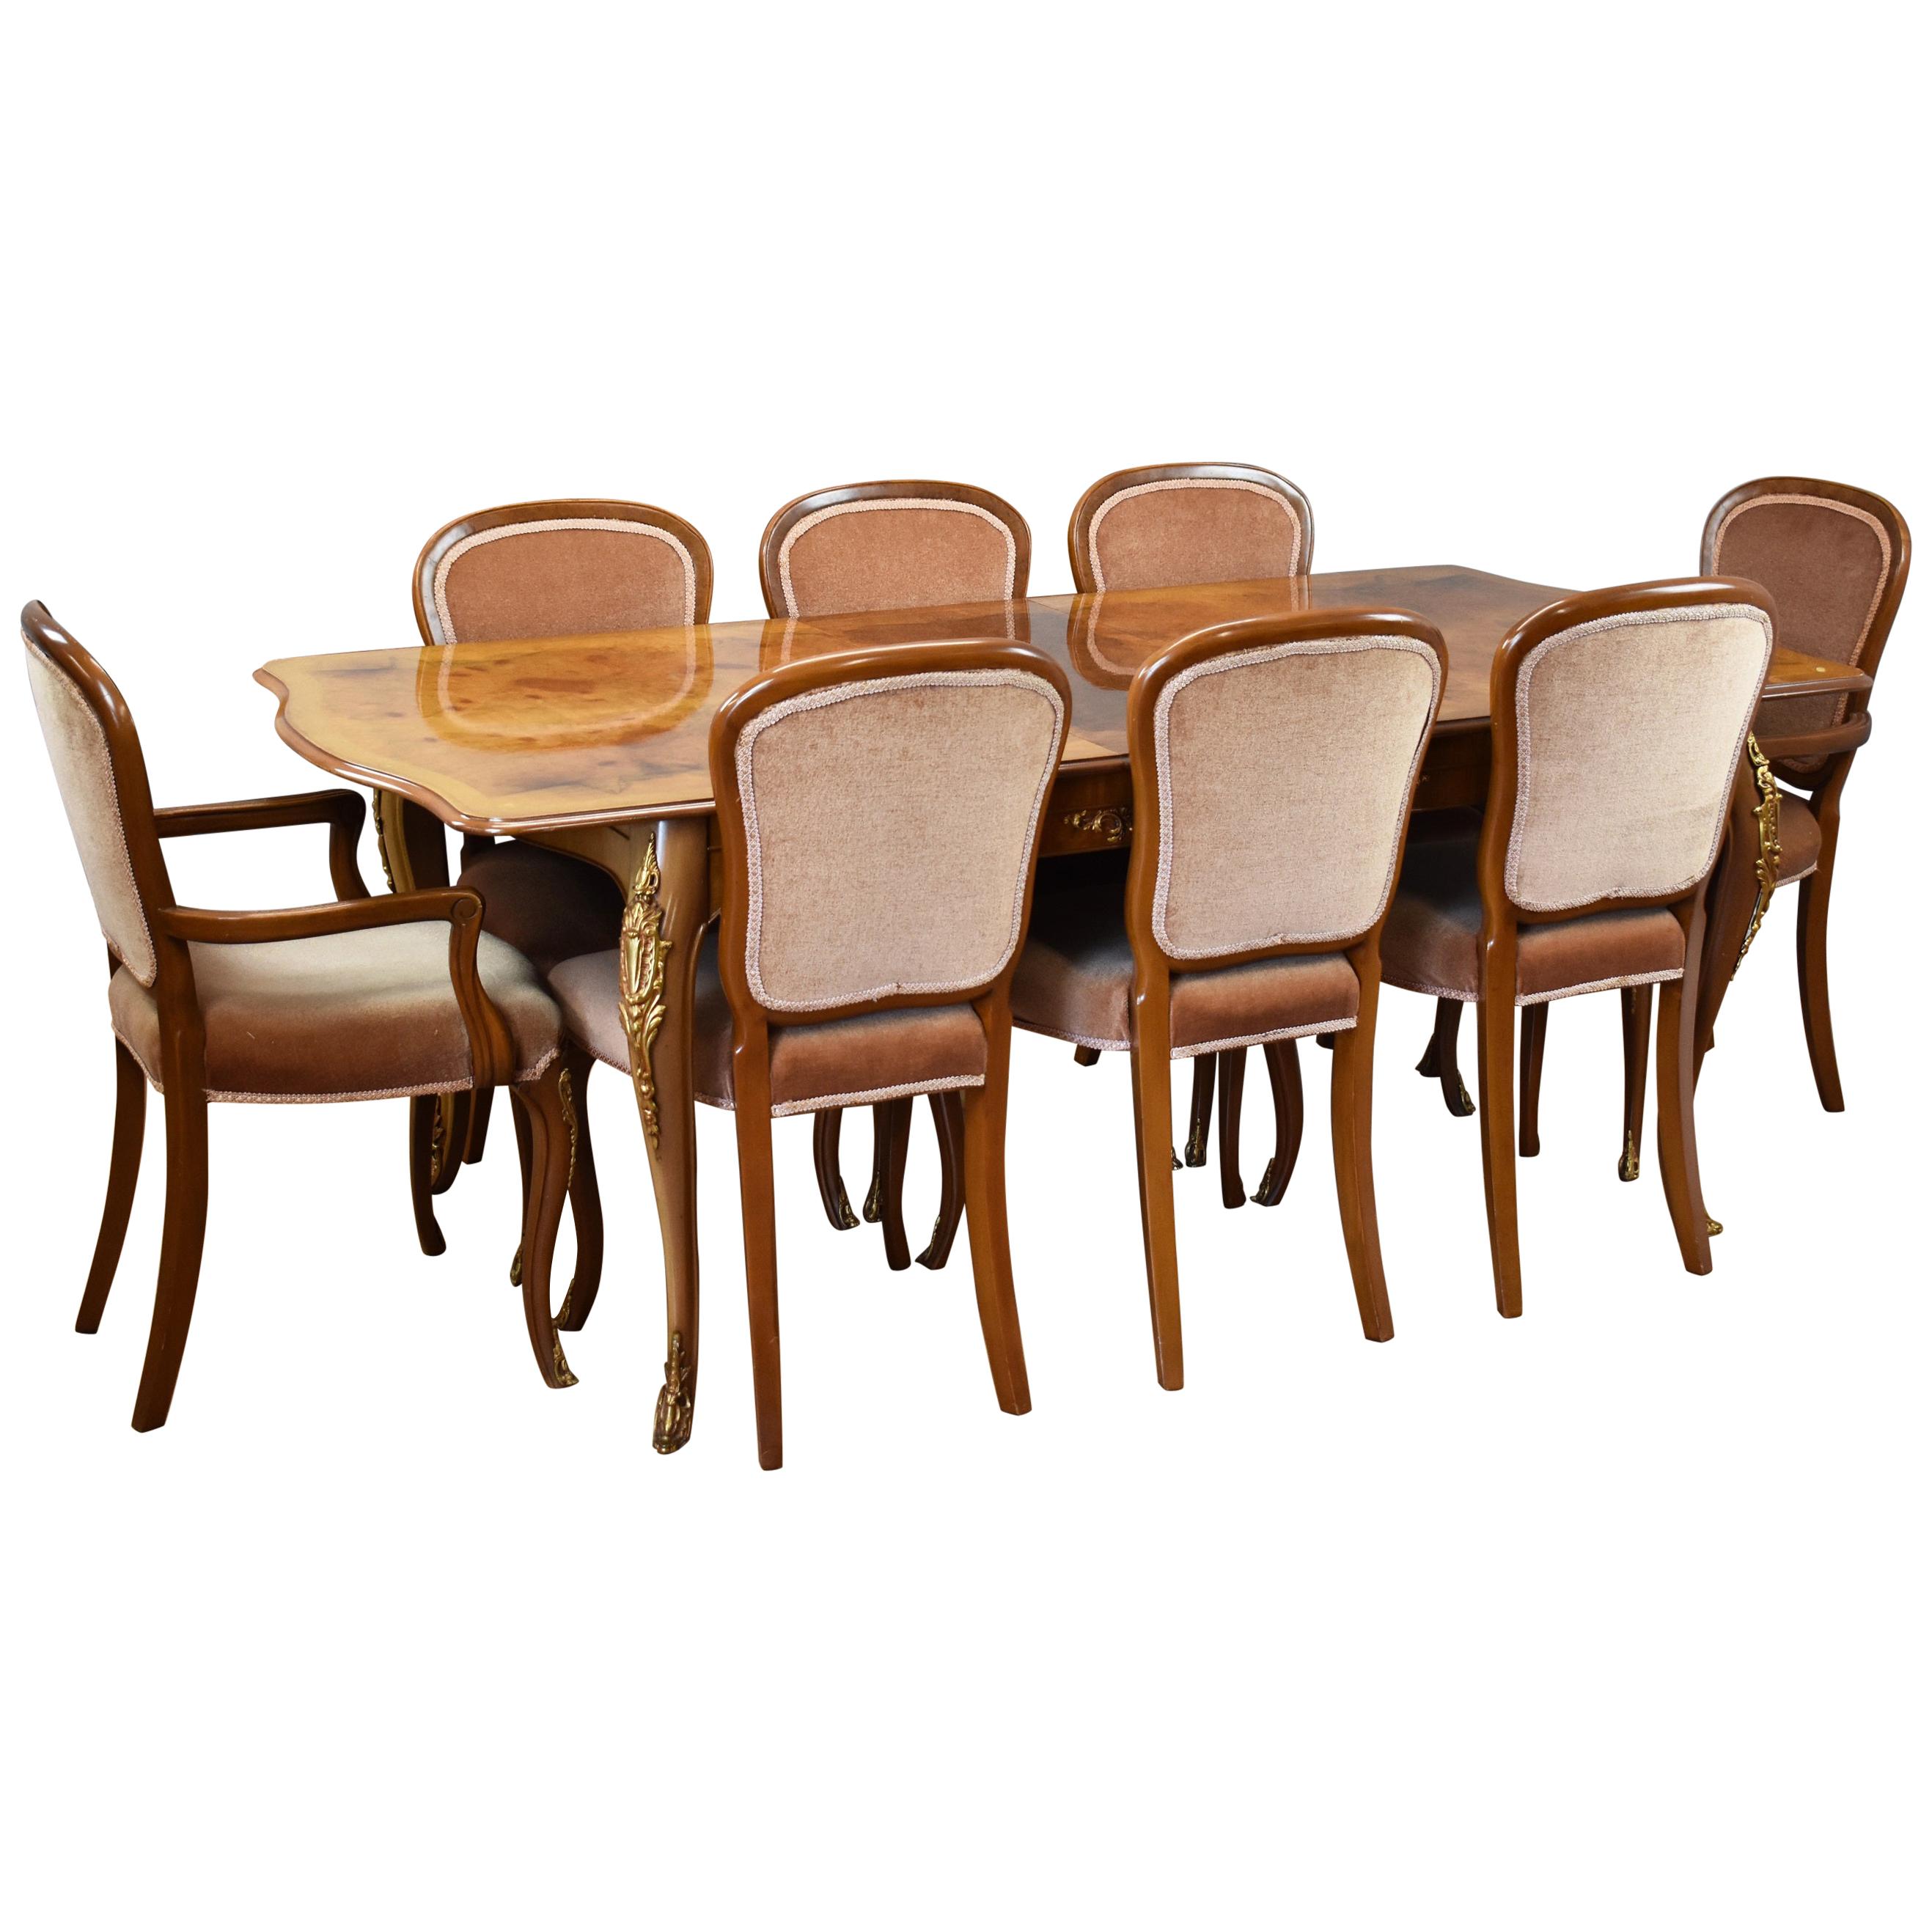 20th Century French Style Burr Walnut Dining Suite by H&L Epstein